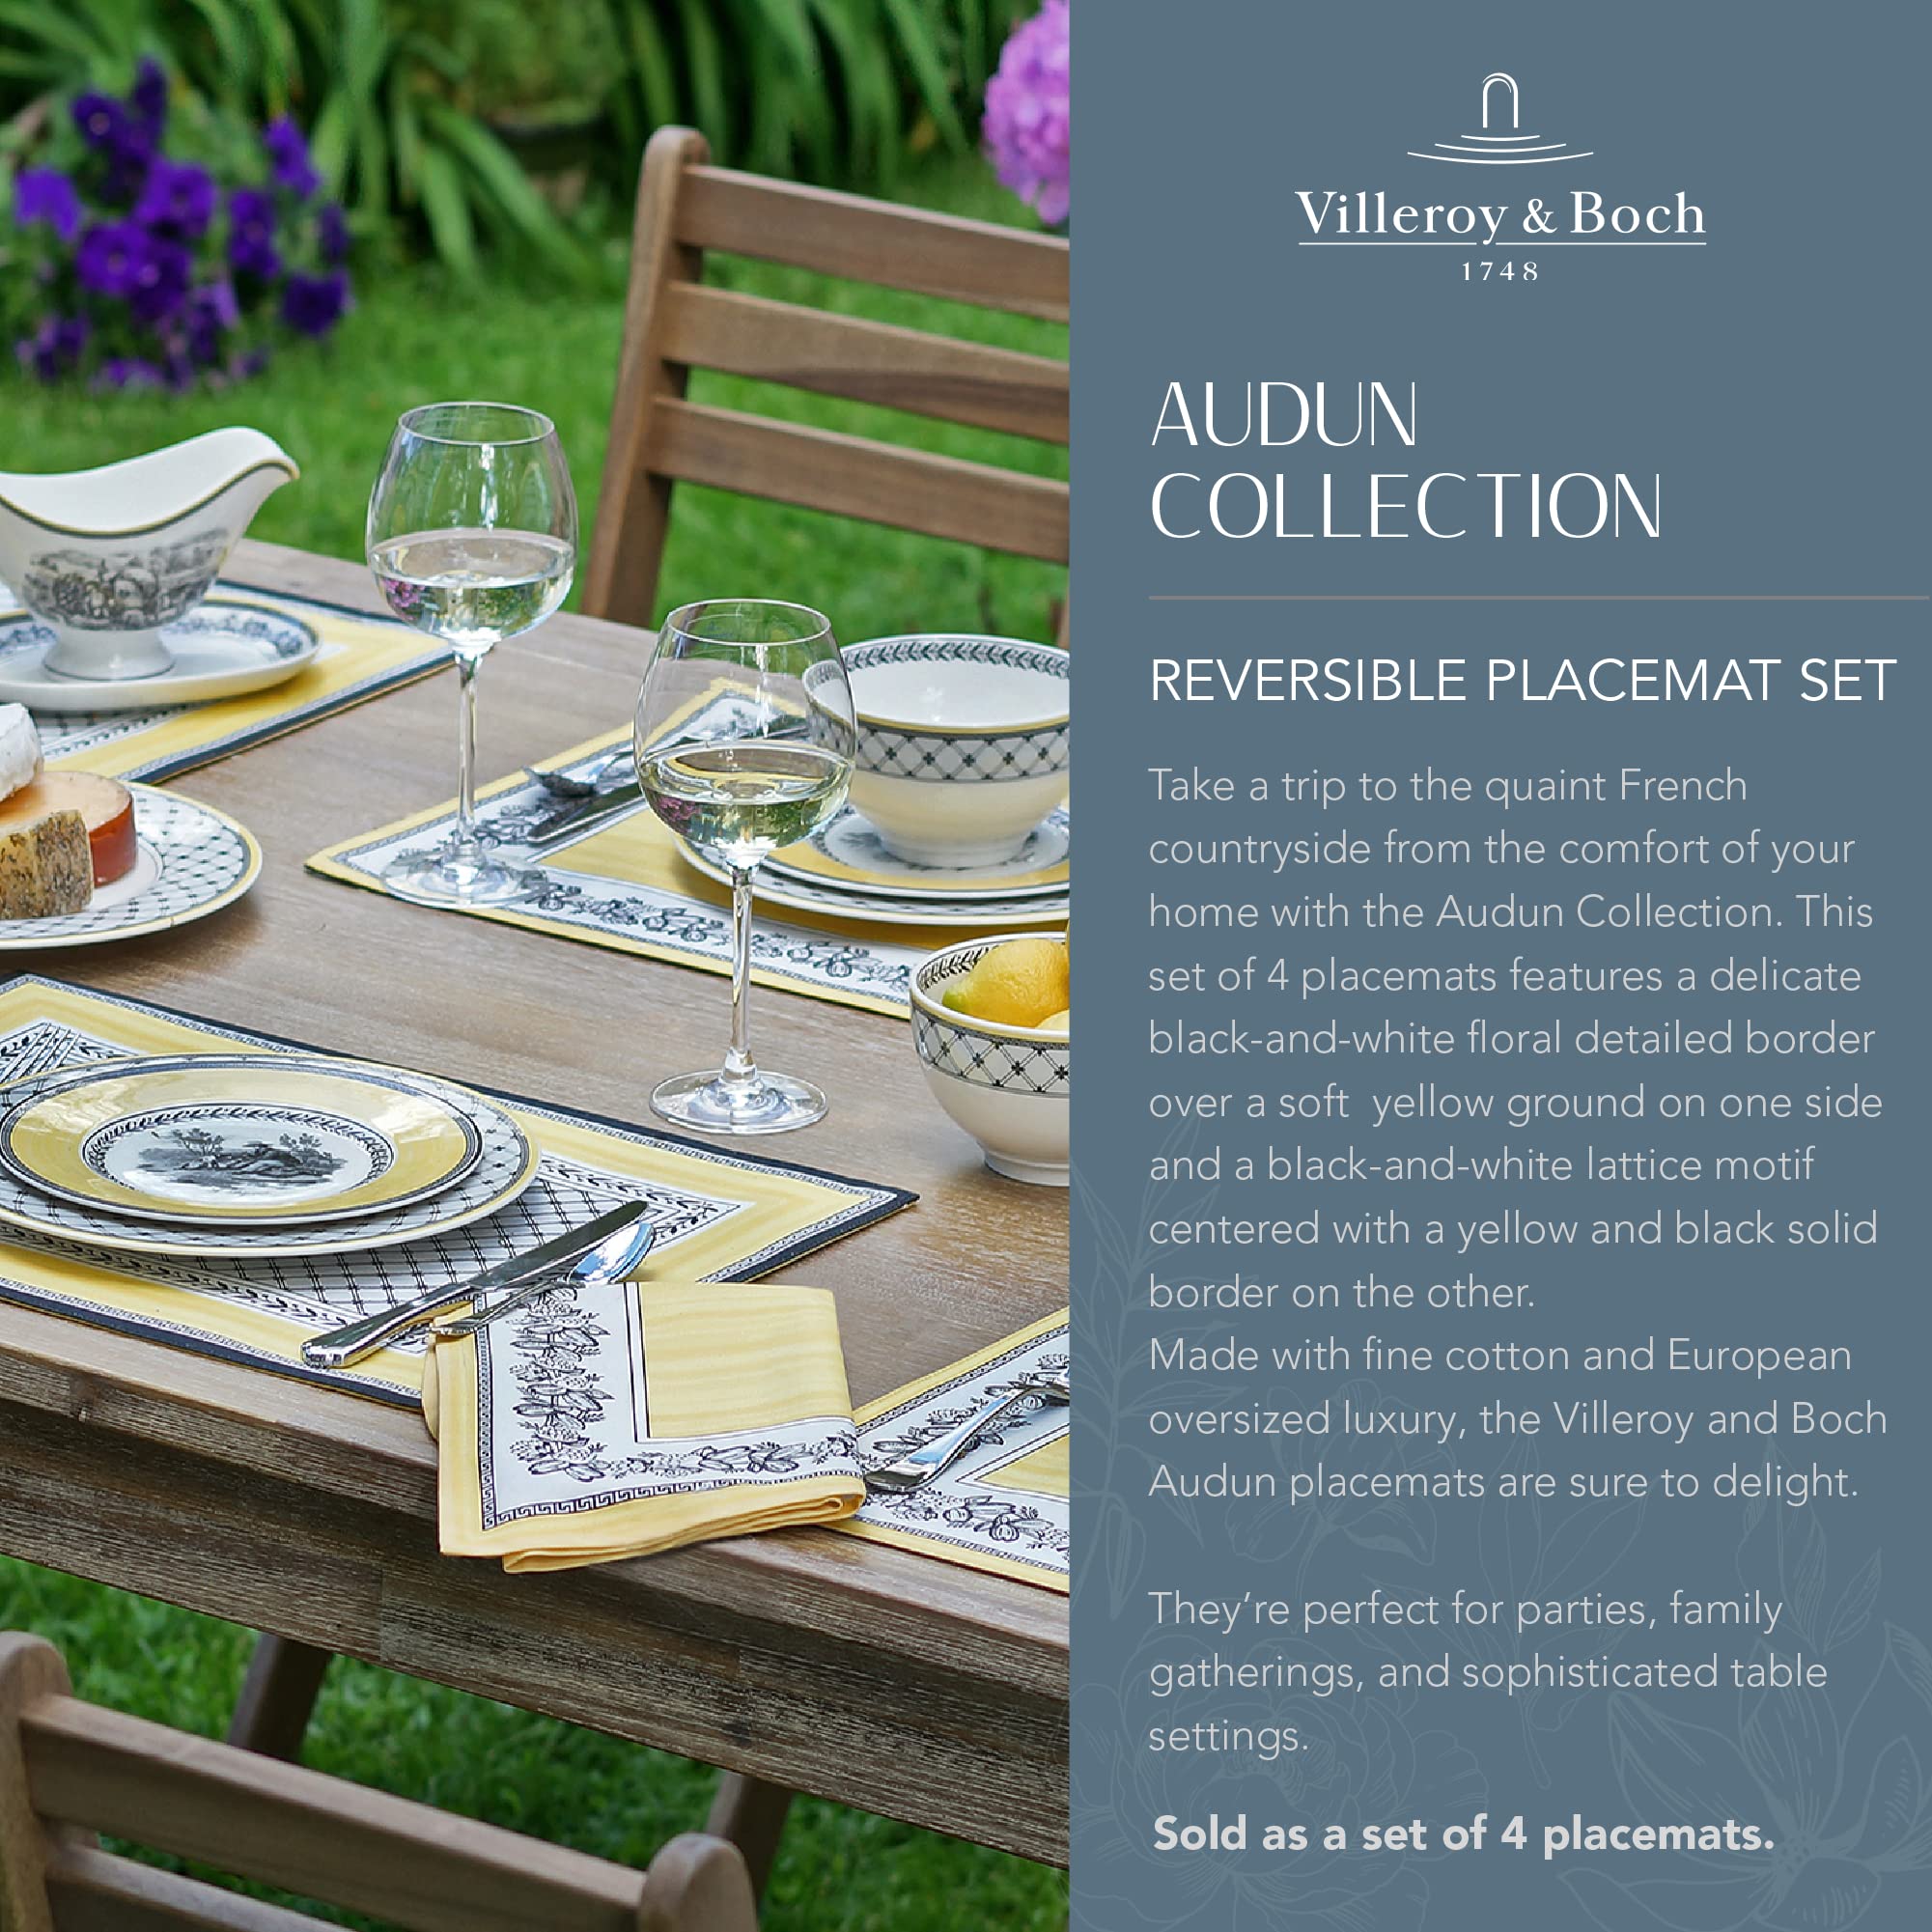 Villeroy and Boch Audun Reversible Patterned Cotton Fabric Placemats, 14 Inches by 20 Inches, Set of 4